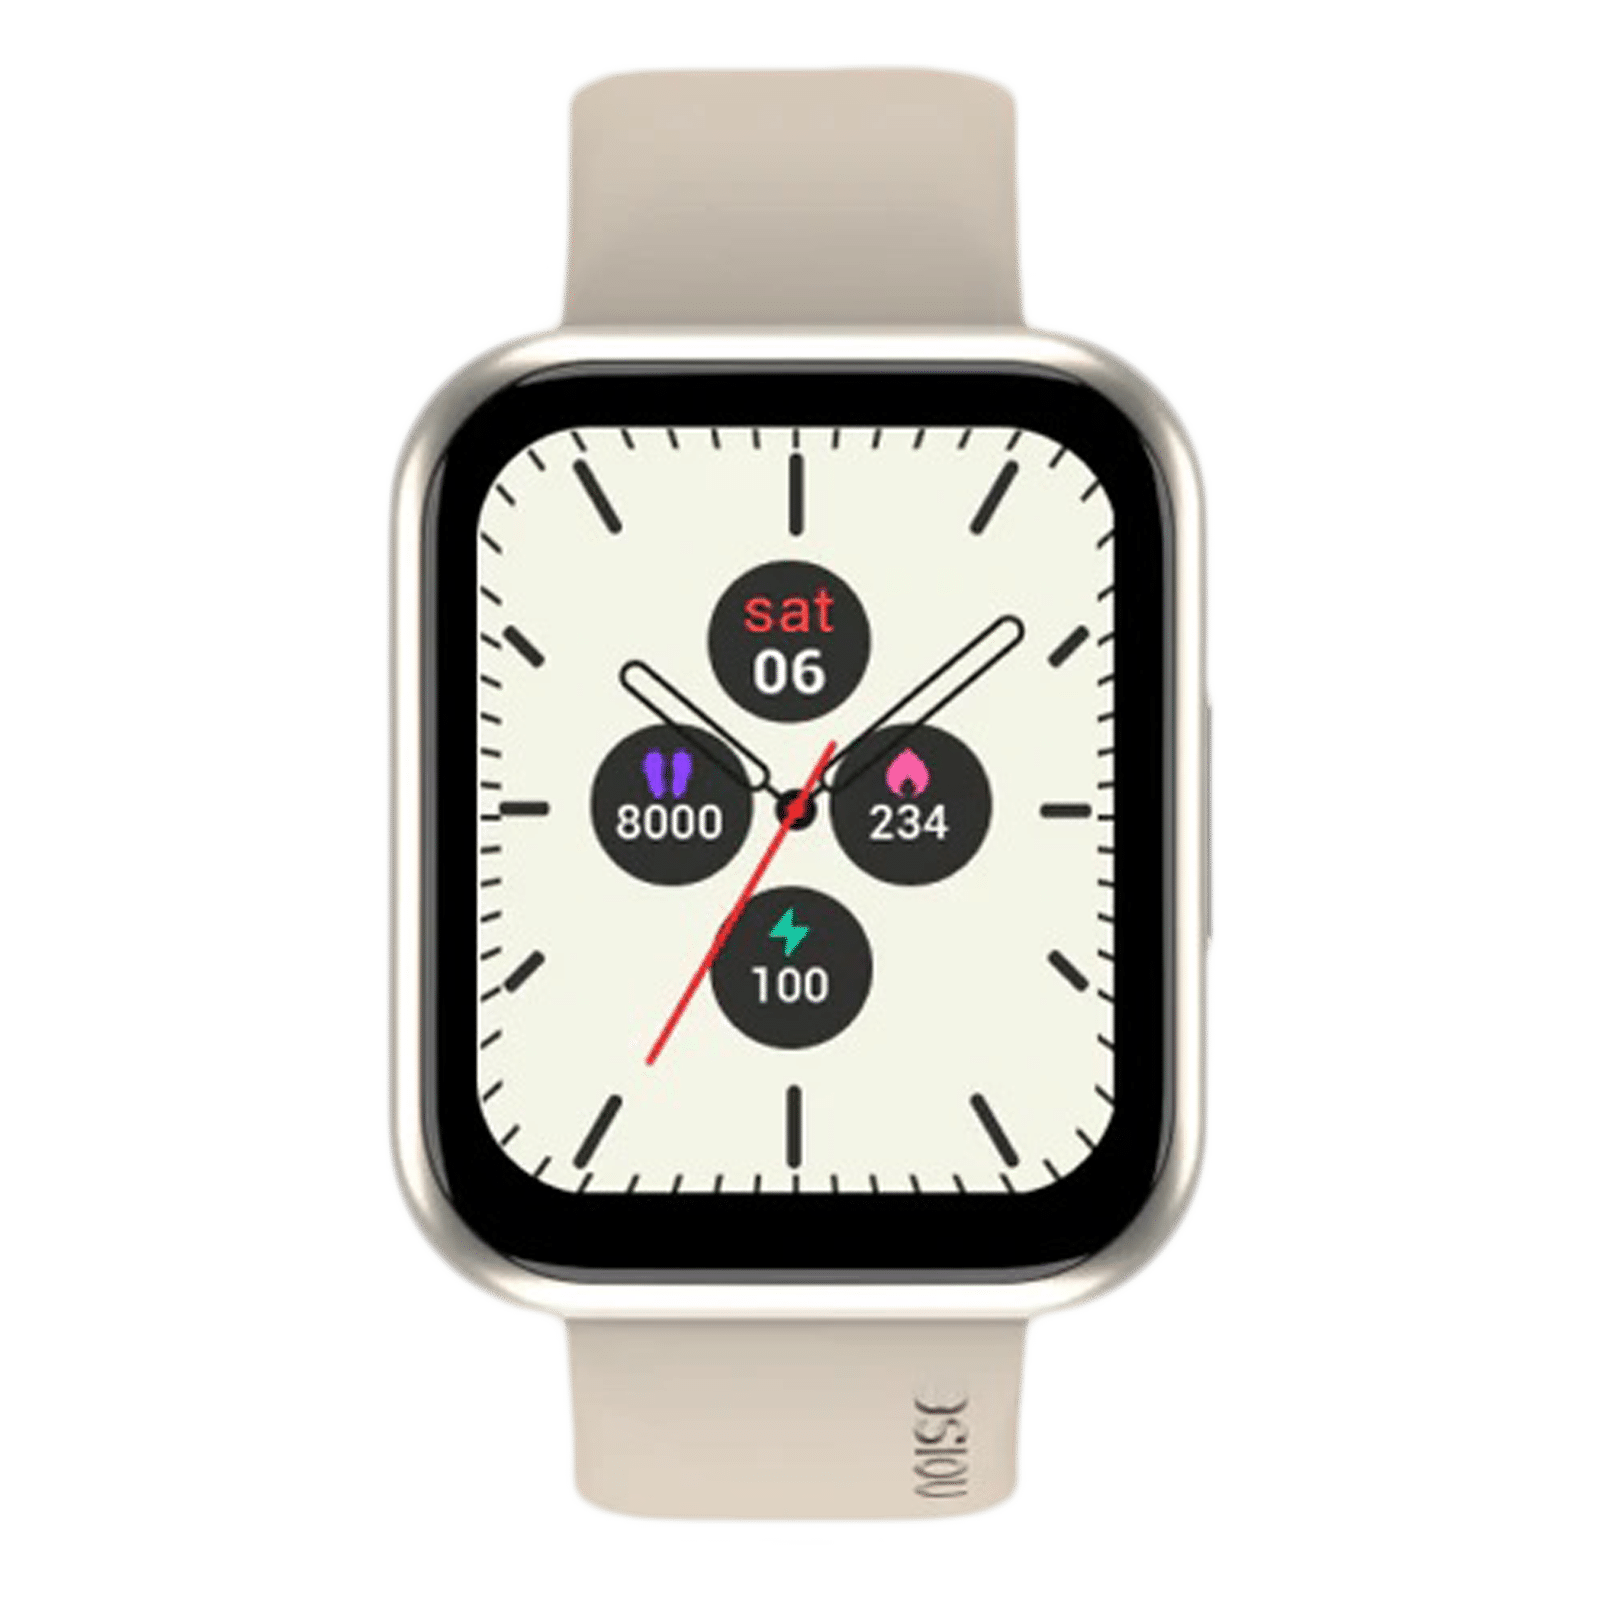 Croma Company - 🔥 PALETTE [HUAWEI] A new watch face is... | Facebook